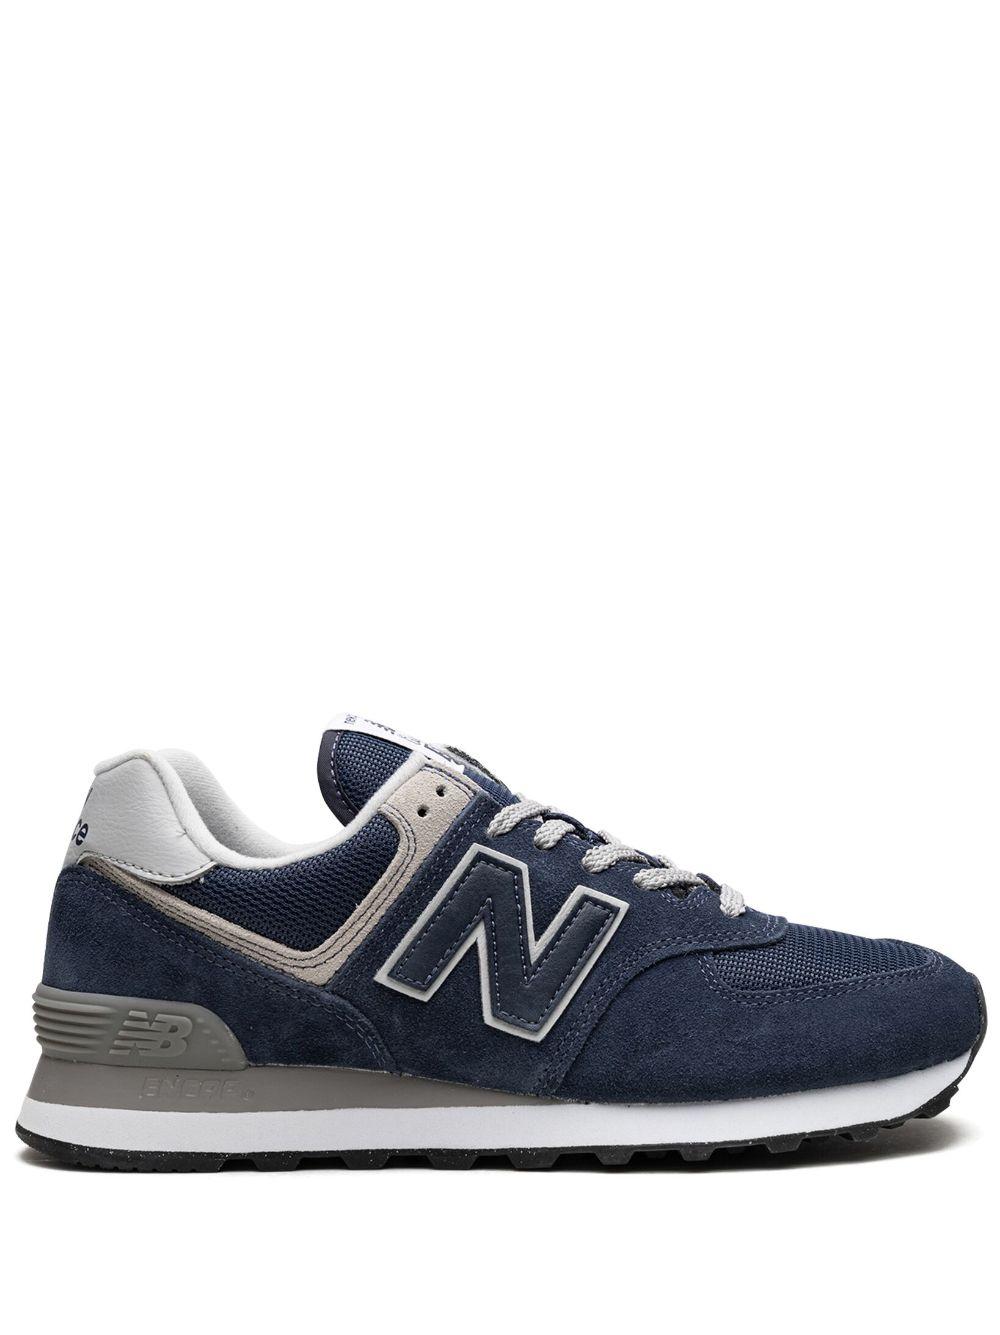 New Balance 574 Core "navy/grey" Sneakers in Blue | Lyst